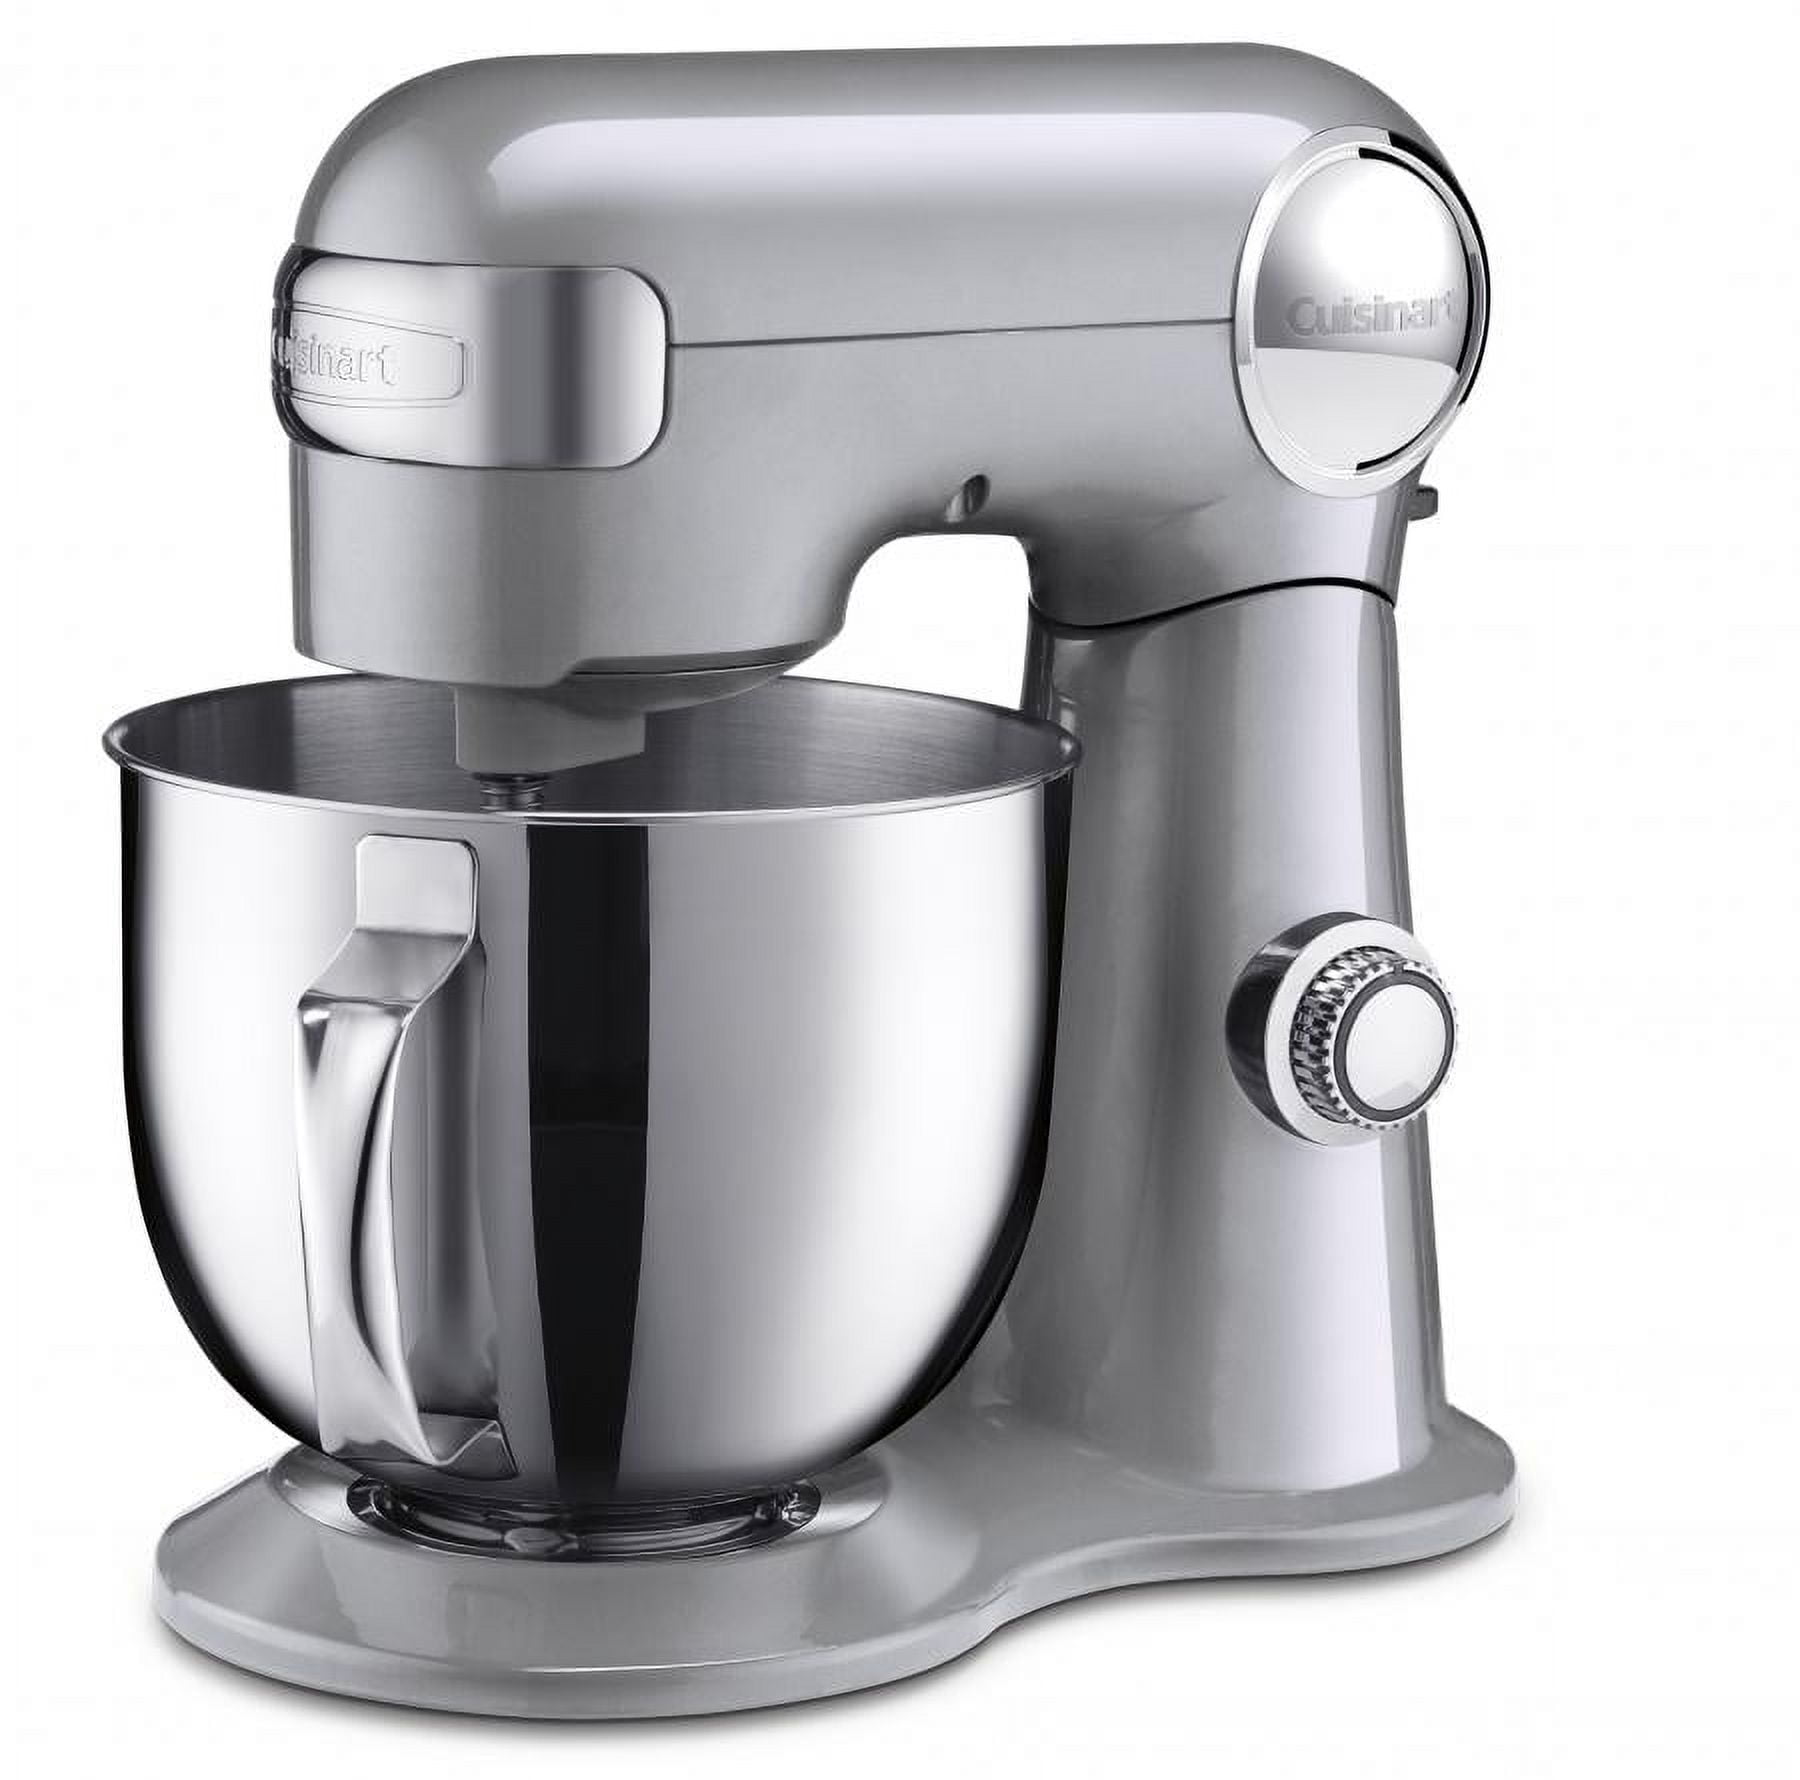 5.5-Quart 500W Cuisinart Stand Mixer (Brushed Chrome) $107.87 + Free Shipping